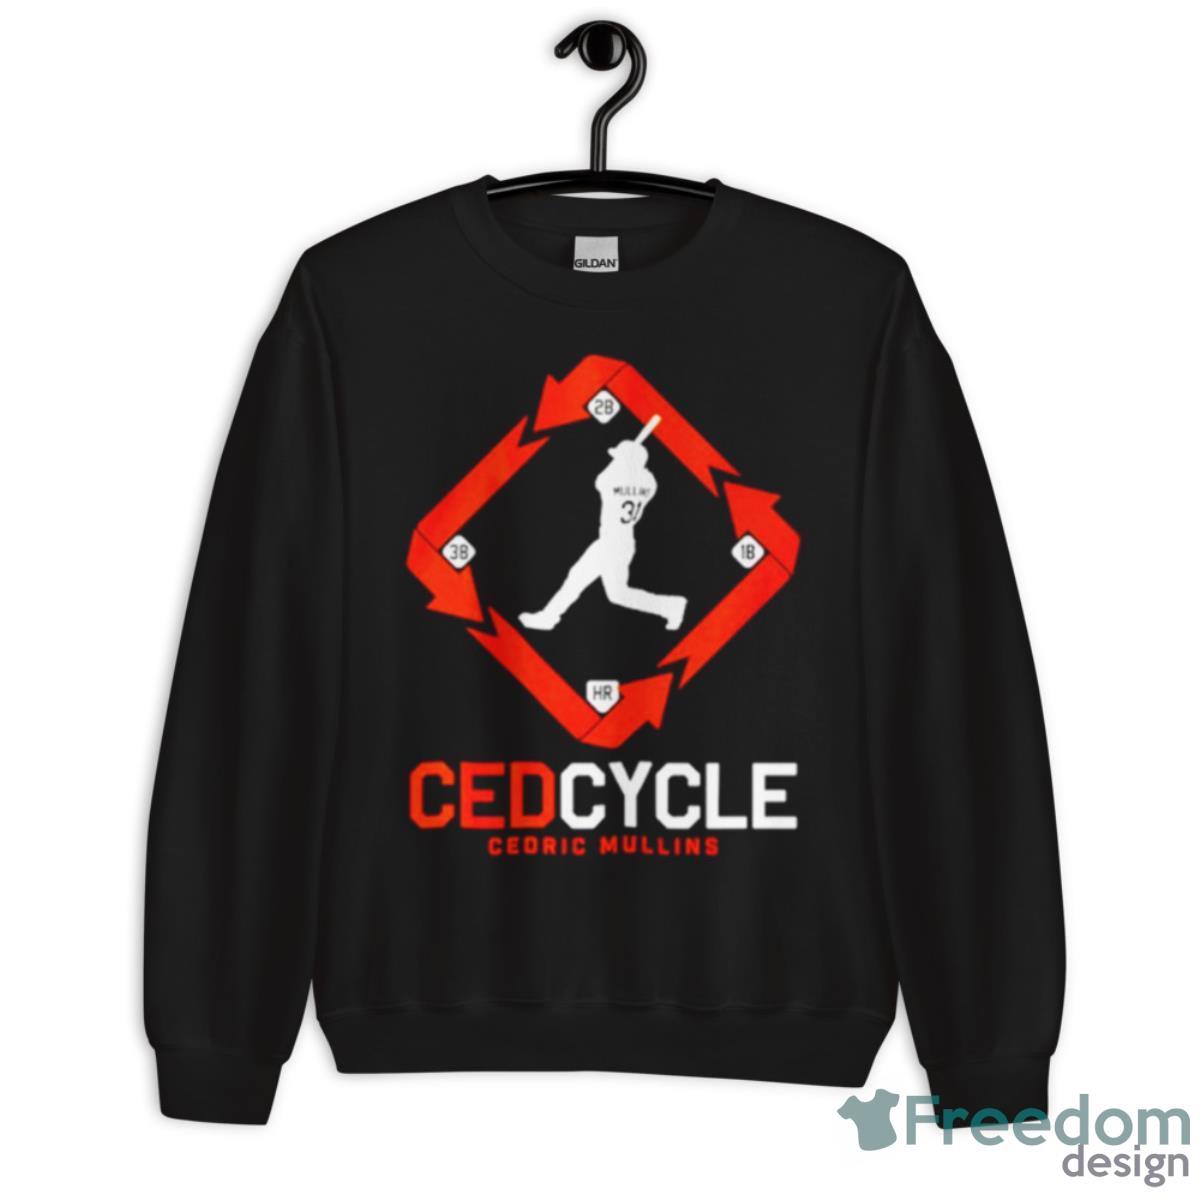 Baltimore Orioles Cedric Mullins Cycle Shirt - Freedomdesign